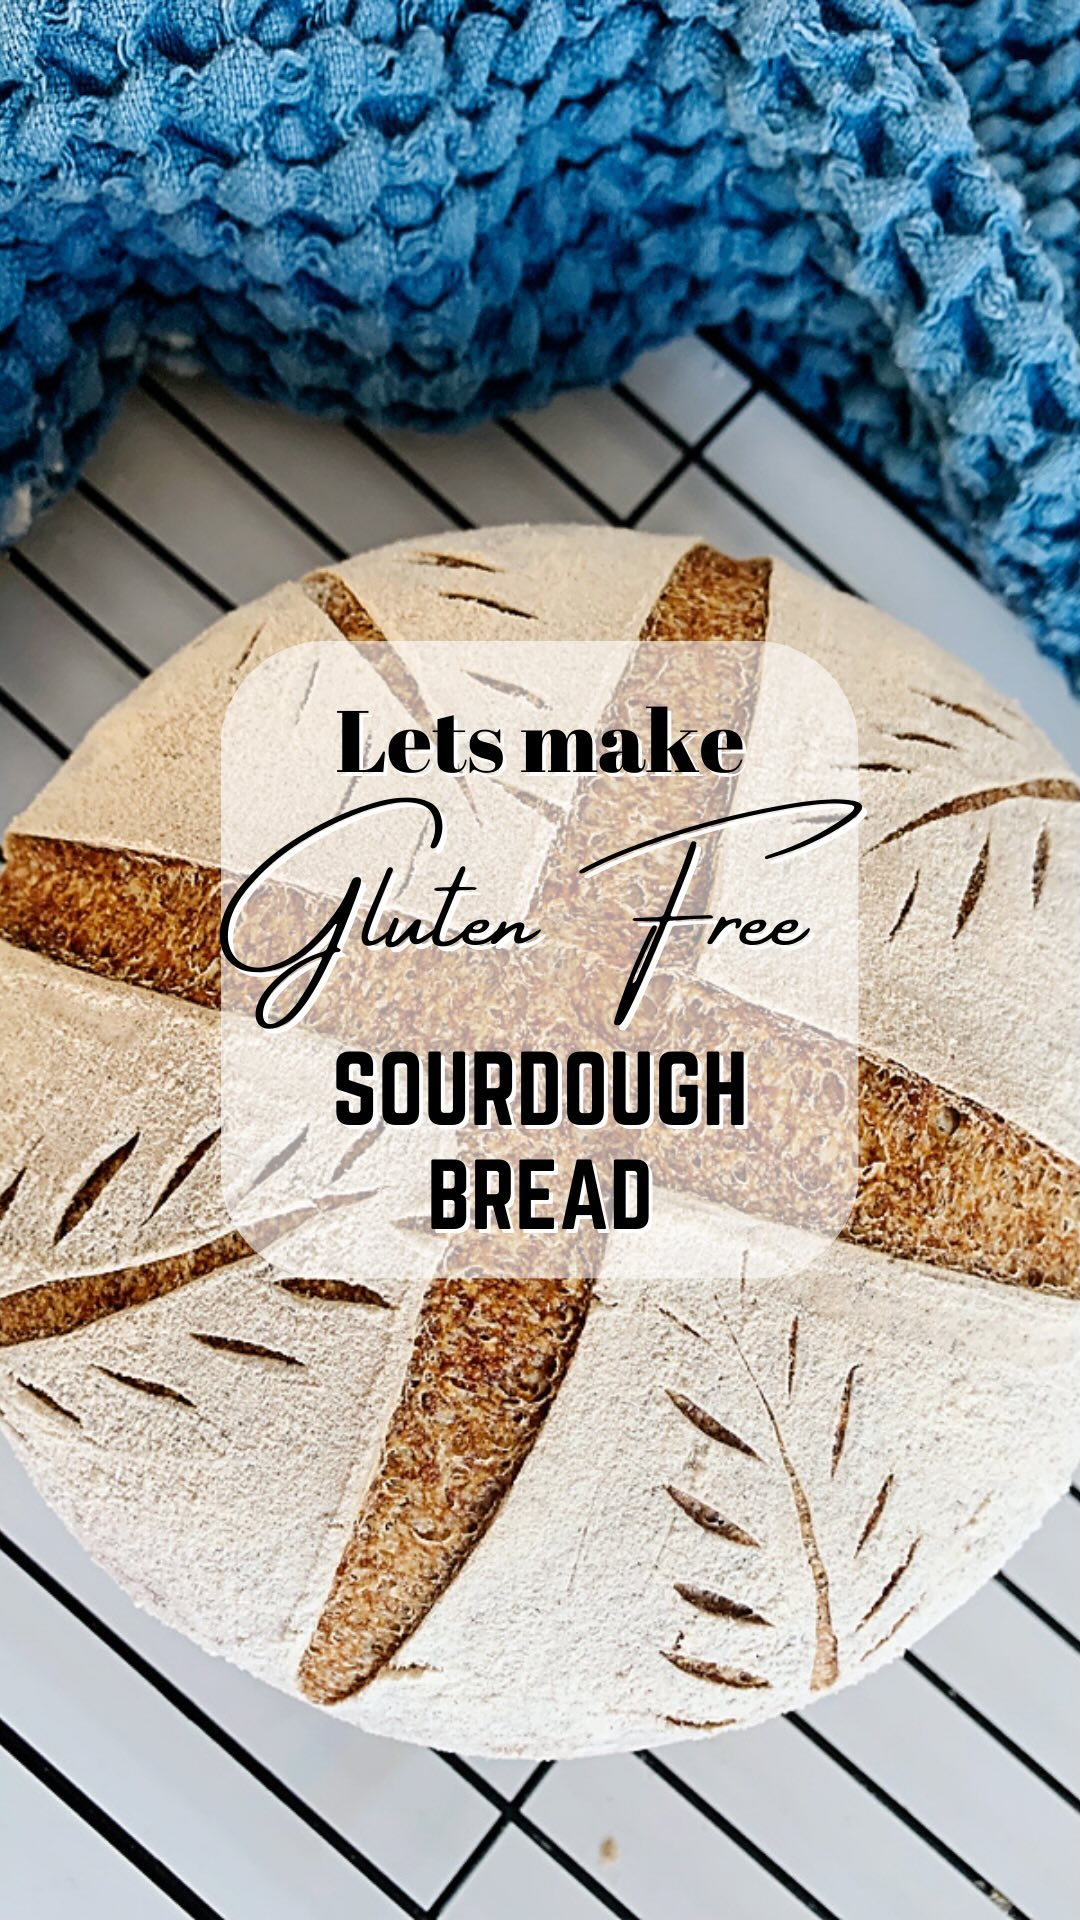 This incredibly easy to follow gluten free sourdough recipe includes follow along videos that will show you how to make a gluten free sourdough bread loaf from scratch! This gluten free sourdough recipe is vegan (no eggs, no dairy), allergen-friendly, refined sugar-free, oat-free, gum-free, soy-free, and nut-free! Please follow along with me as I share with you my intuitive approach to building & maintaining a sourdough starter and baking a beautiful gluten free artisan sourdough break loaf! 

Full Recipe: link in my bio or 👇🏻

https://turmericmecrazy.com/gluten-free-sourdough-bread-recipe

#glutenfreesourdoughbreadrecipe #glutenfreesourdoughbread #sourdoughrecipes #sourdoughbread #sourdoughbaking, #glutenfreeeats #sourdoughrecipeglutenfree, #glutenfreerecipes #glutenfreebaking #glutenfree #sourdoughglutenfree #glutenfreeveganbaking #fermentedbreads #glutenfreesourdoughbaking #glutenfreesourdoughworkshop